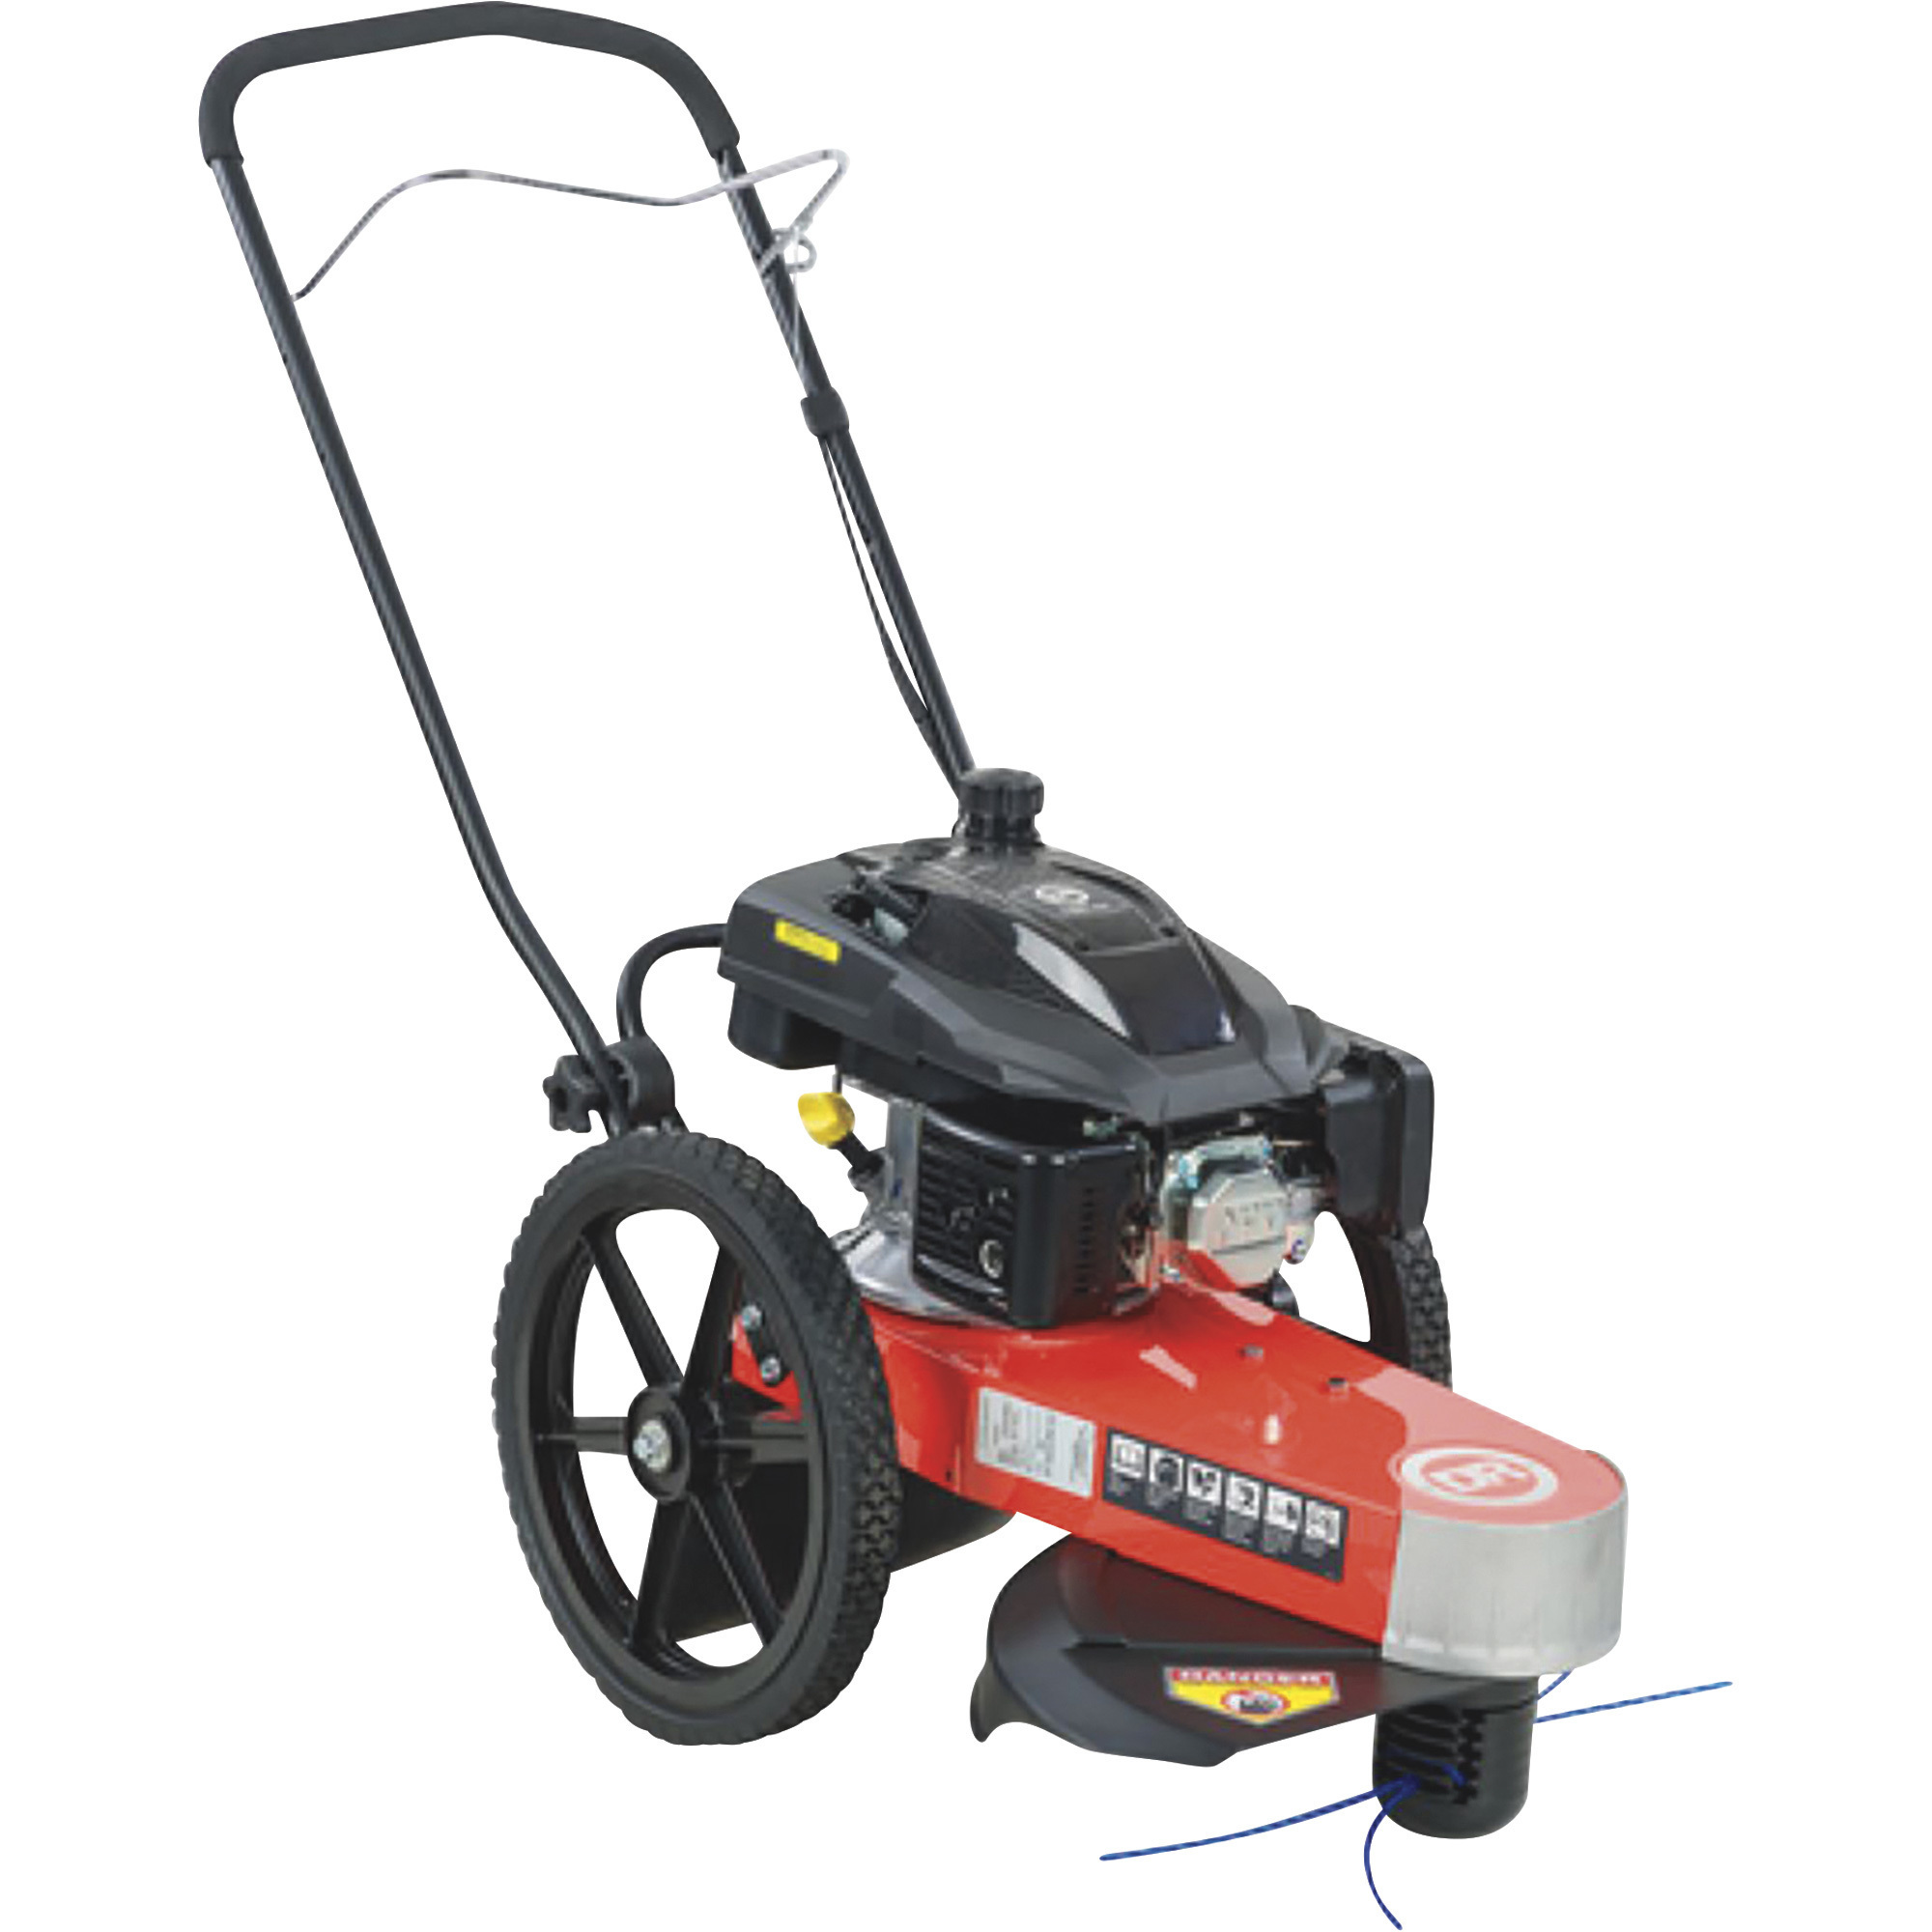 DR Power PRO High-Wheel Trimmer Mower with Electric Start, 9.70 Ft./Lb. Torque, 185cc Engine, 22Inch Cutting Path, Model TR45097DMN -  DR Power Equipment